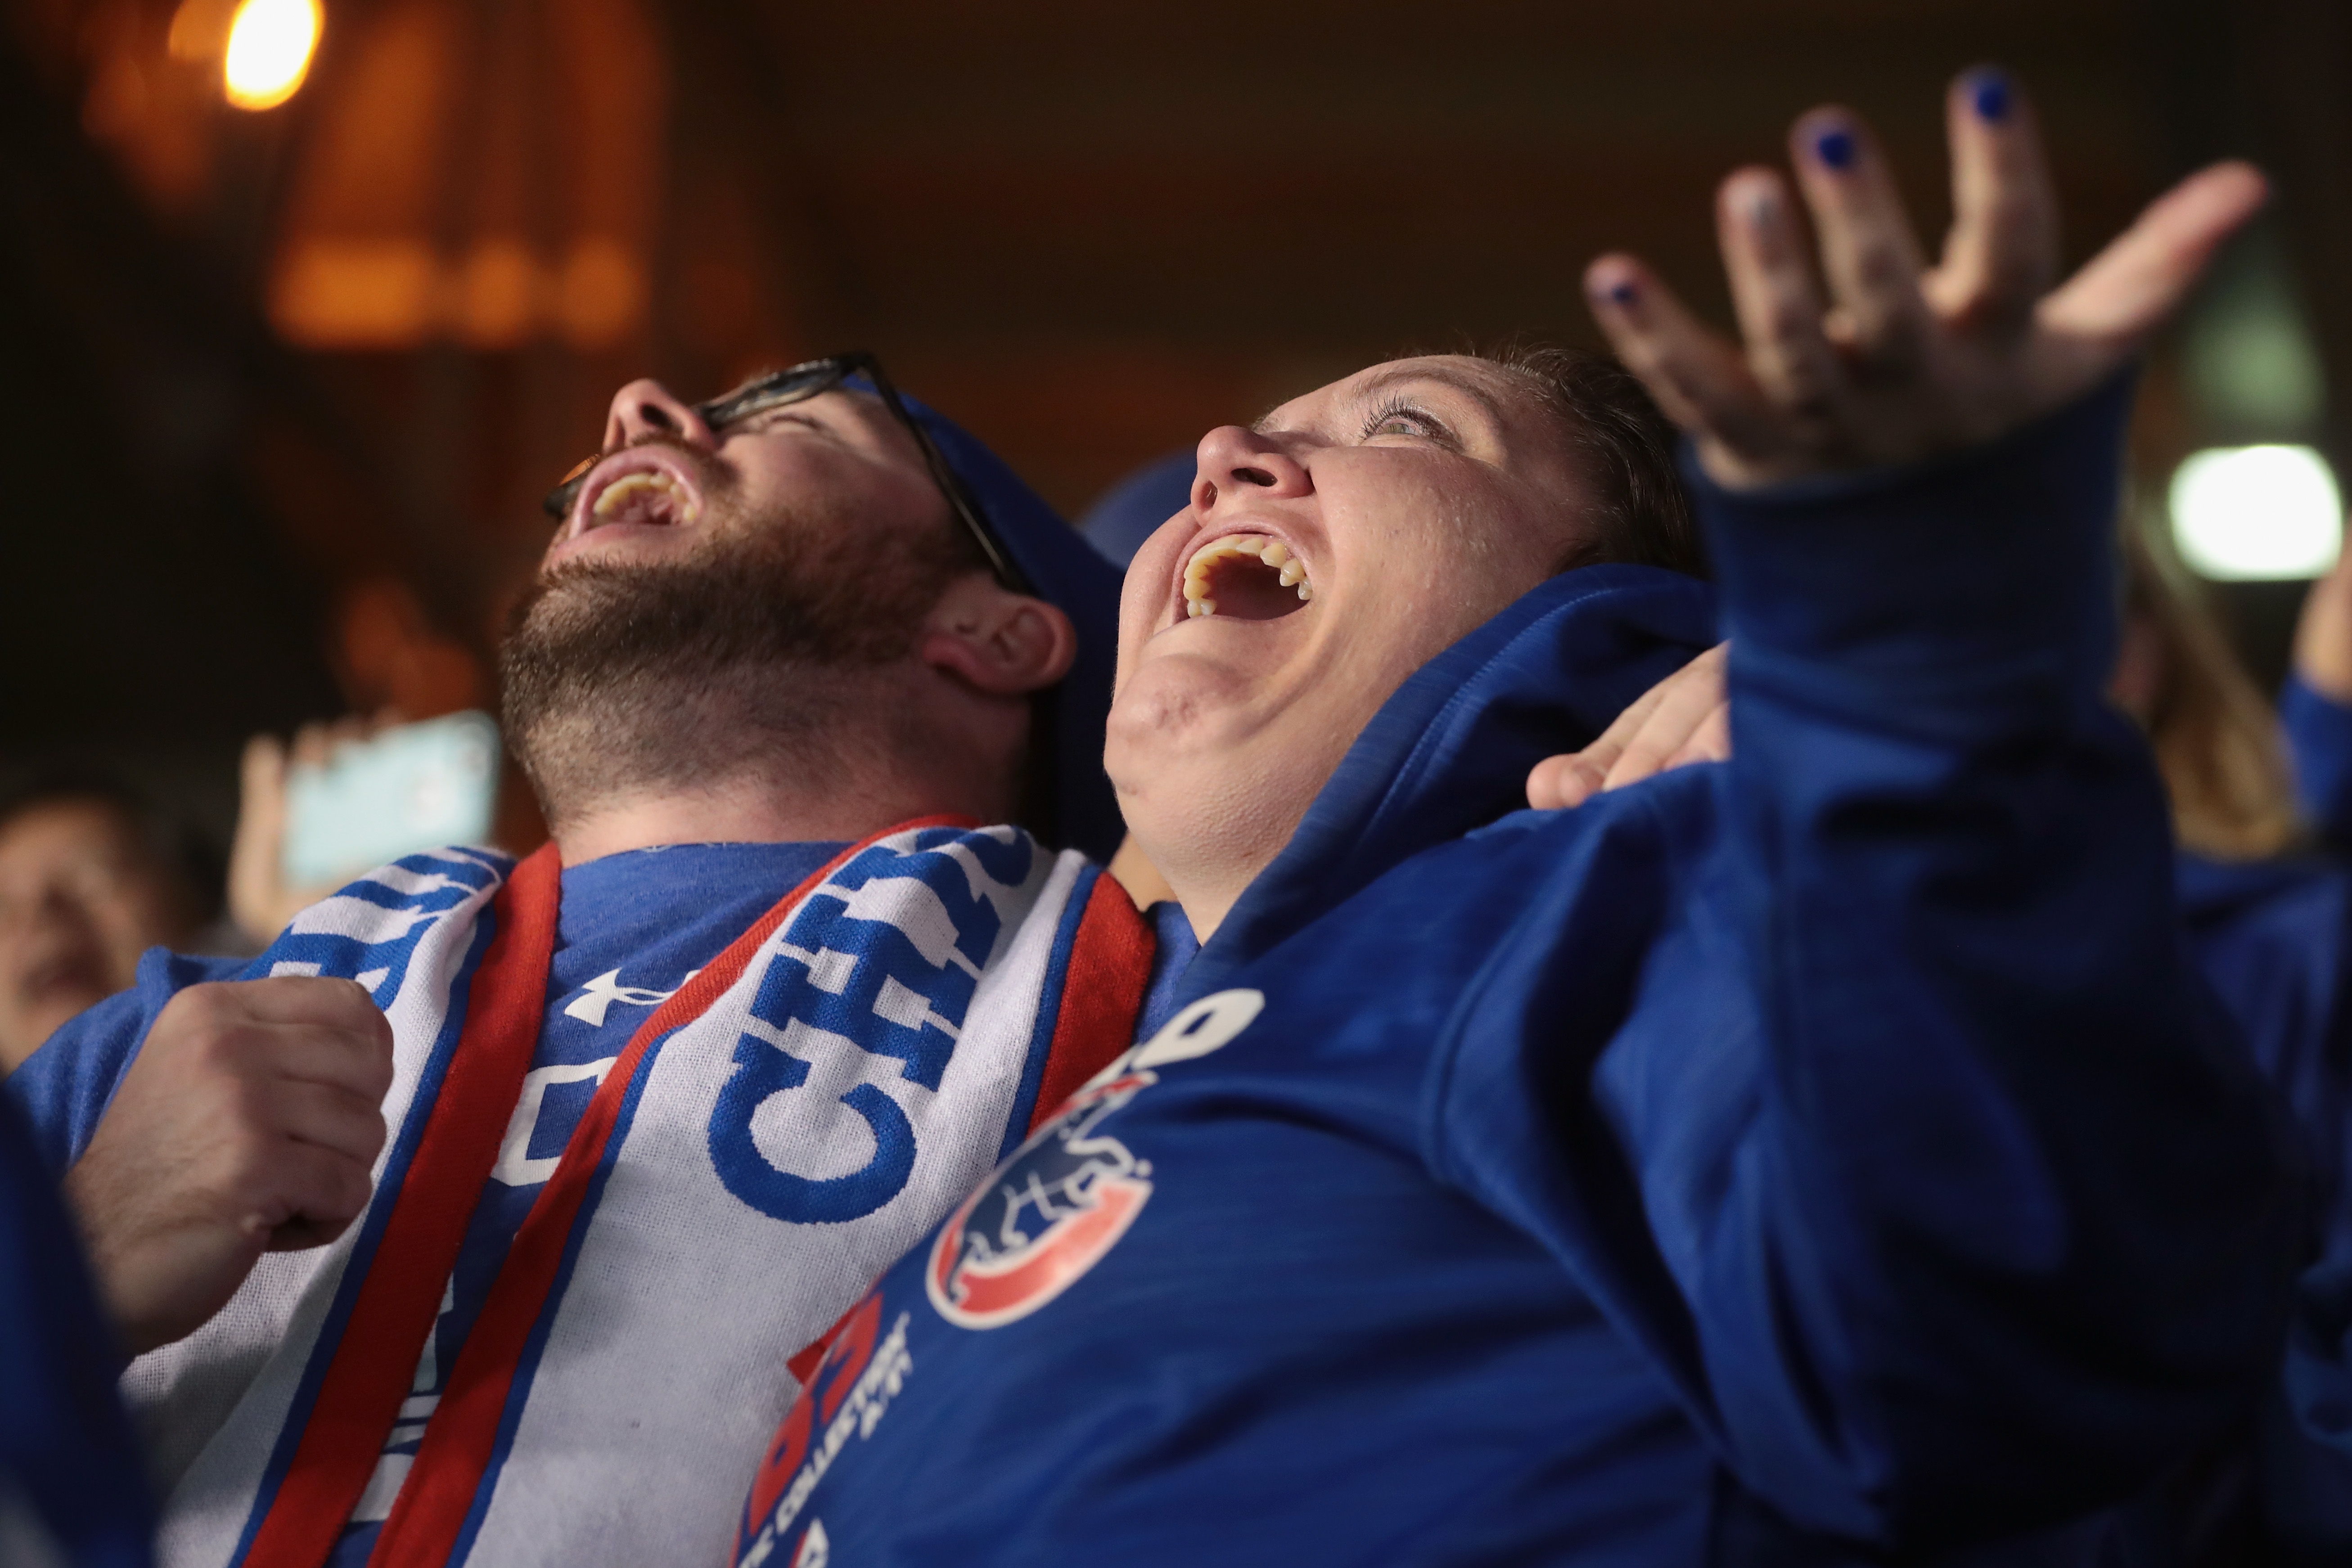 Fans cheer during Game Five of the 2016 World Series between the Chicago Cubs and the Cleveland Indians at Wrigley Field on October 30, 2016. Photo by Scott Olson/Getty Images.